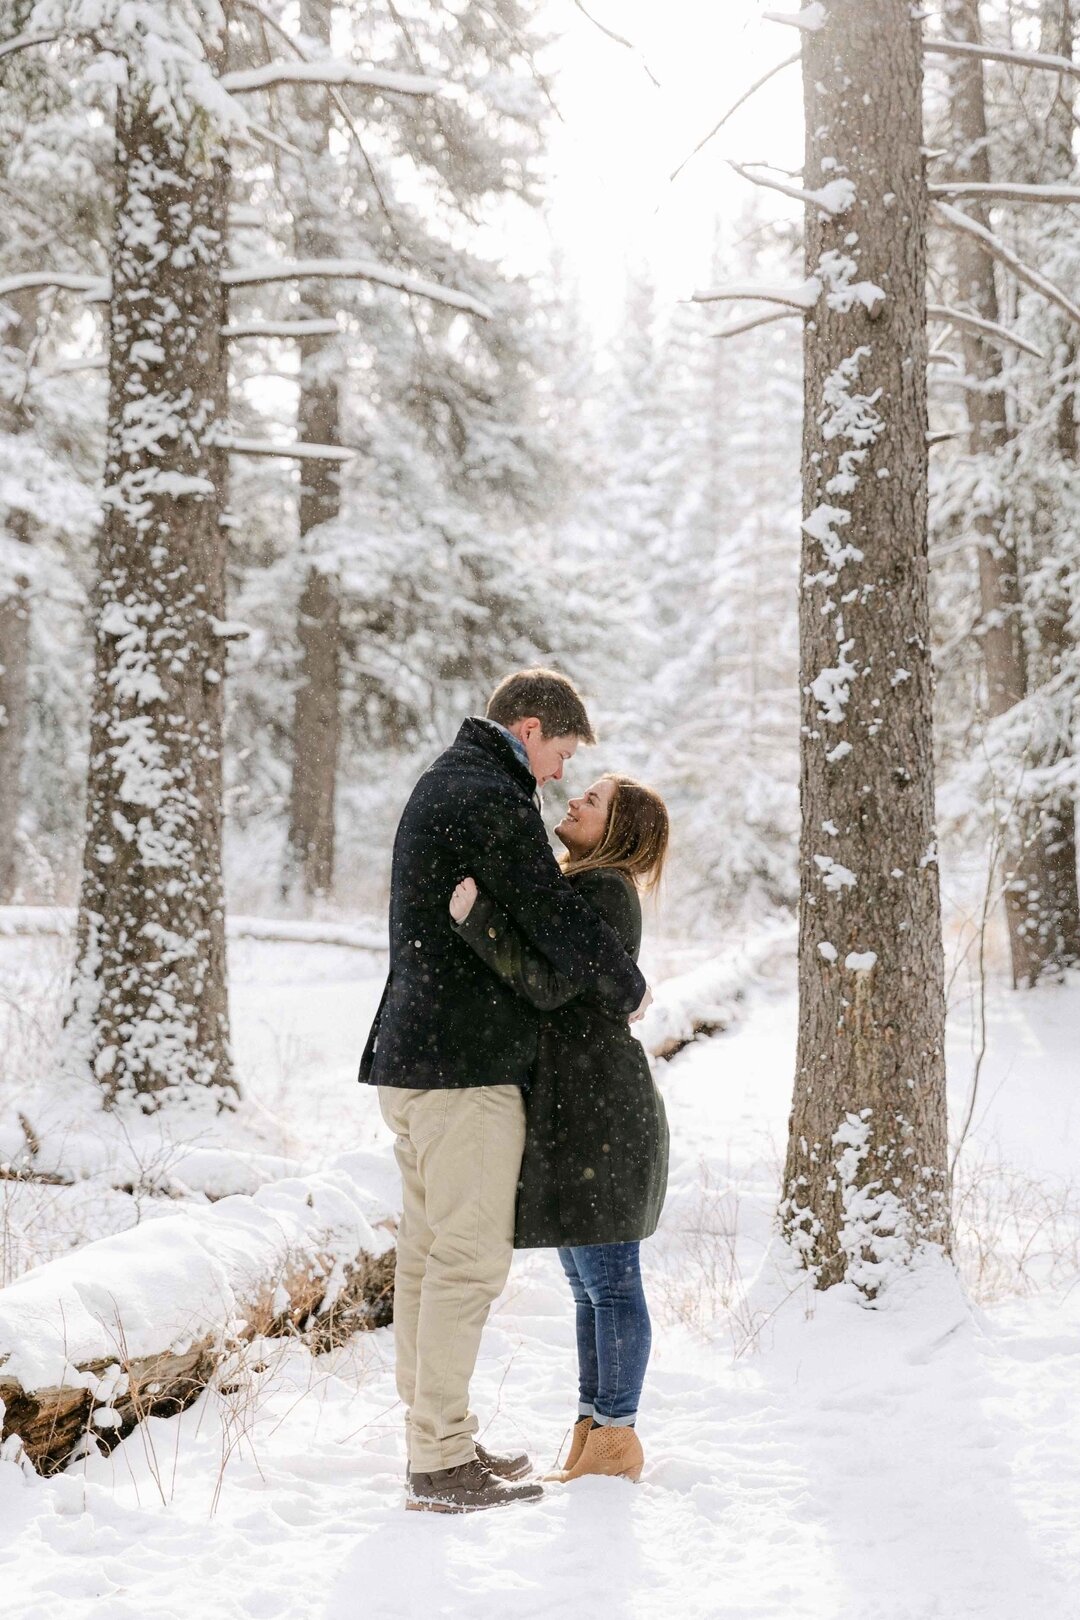 There is just something about slowly drifting snow that adds the perfect touch of magic to any photograph, but especially photographs of people in love &hearts;⁣
#winterlovin #wintercouples #driftingsnow #snowflakes #weddingseason #loveauthentic #lov